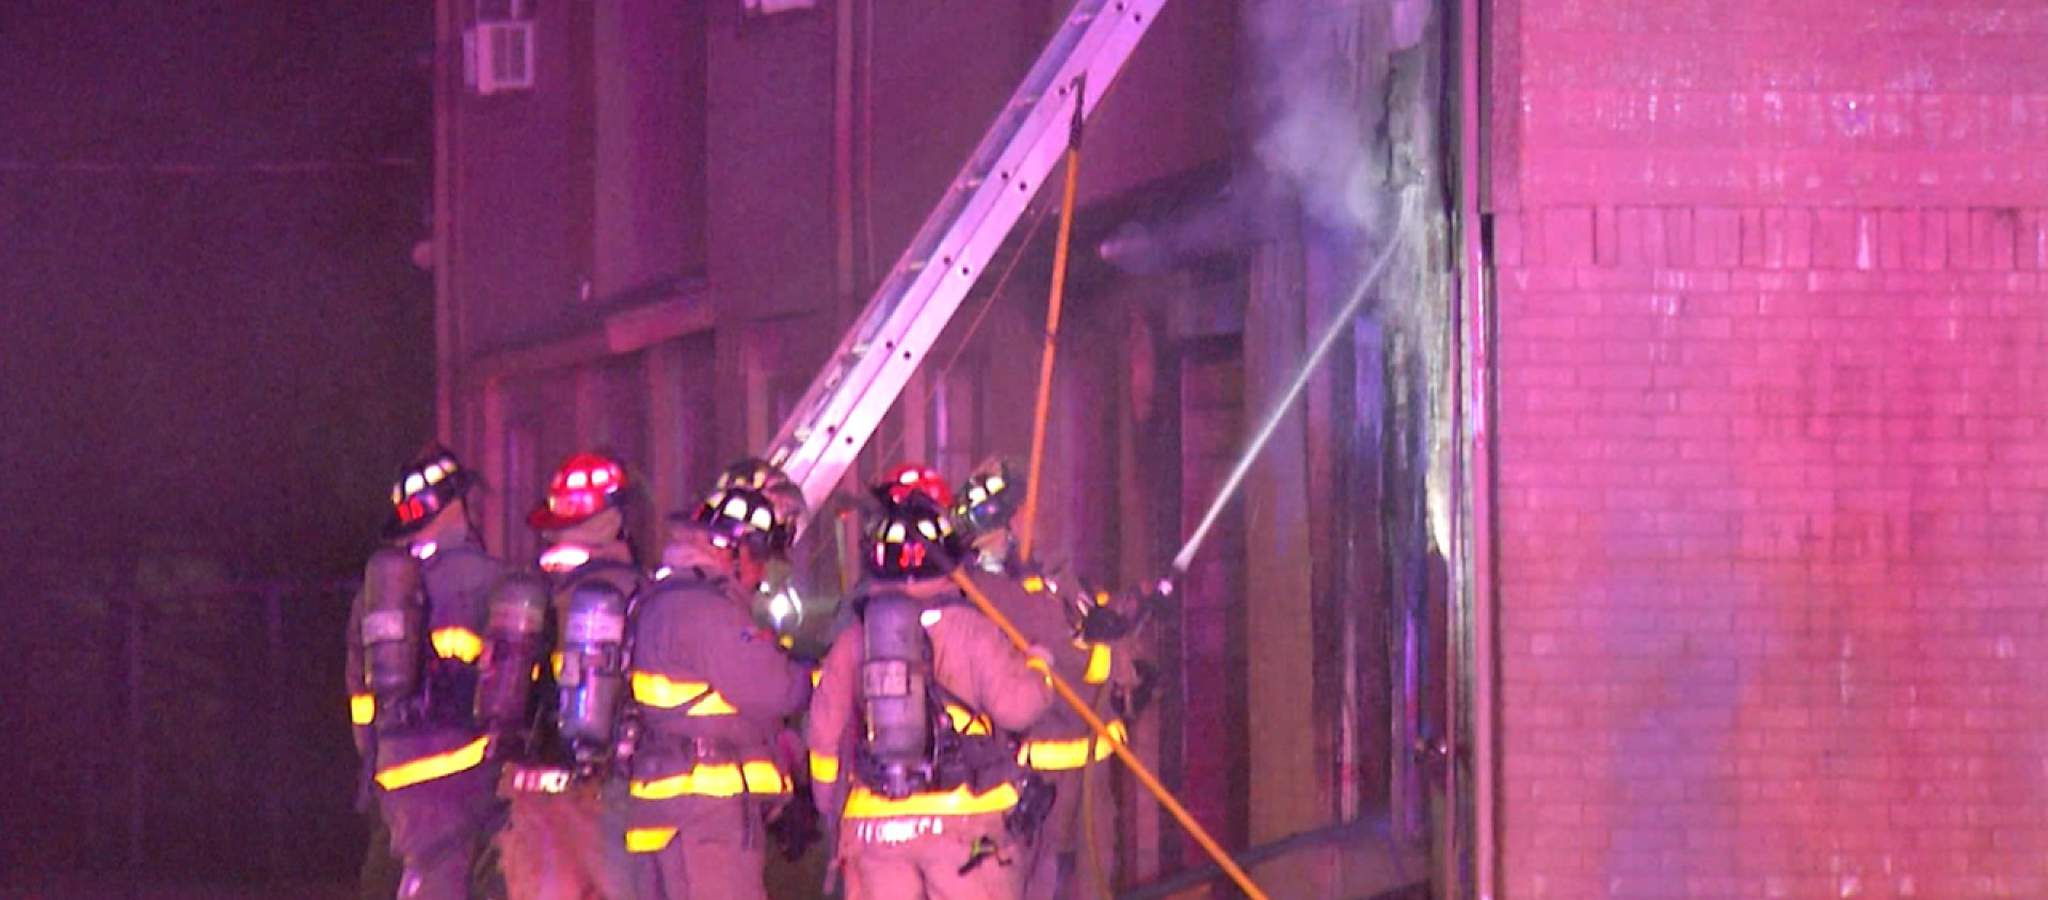 Residents displaced following apartment fire on far West Side, firefighters say